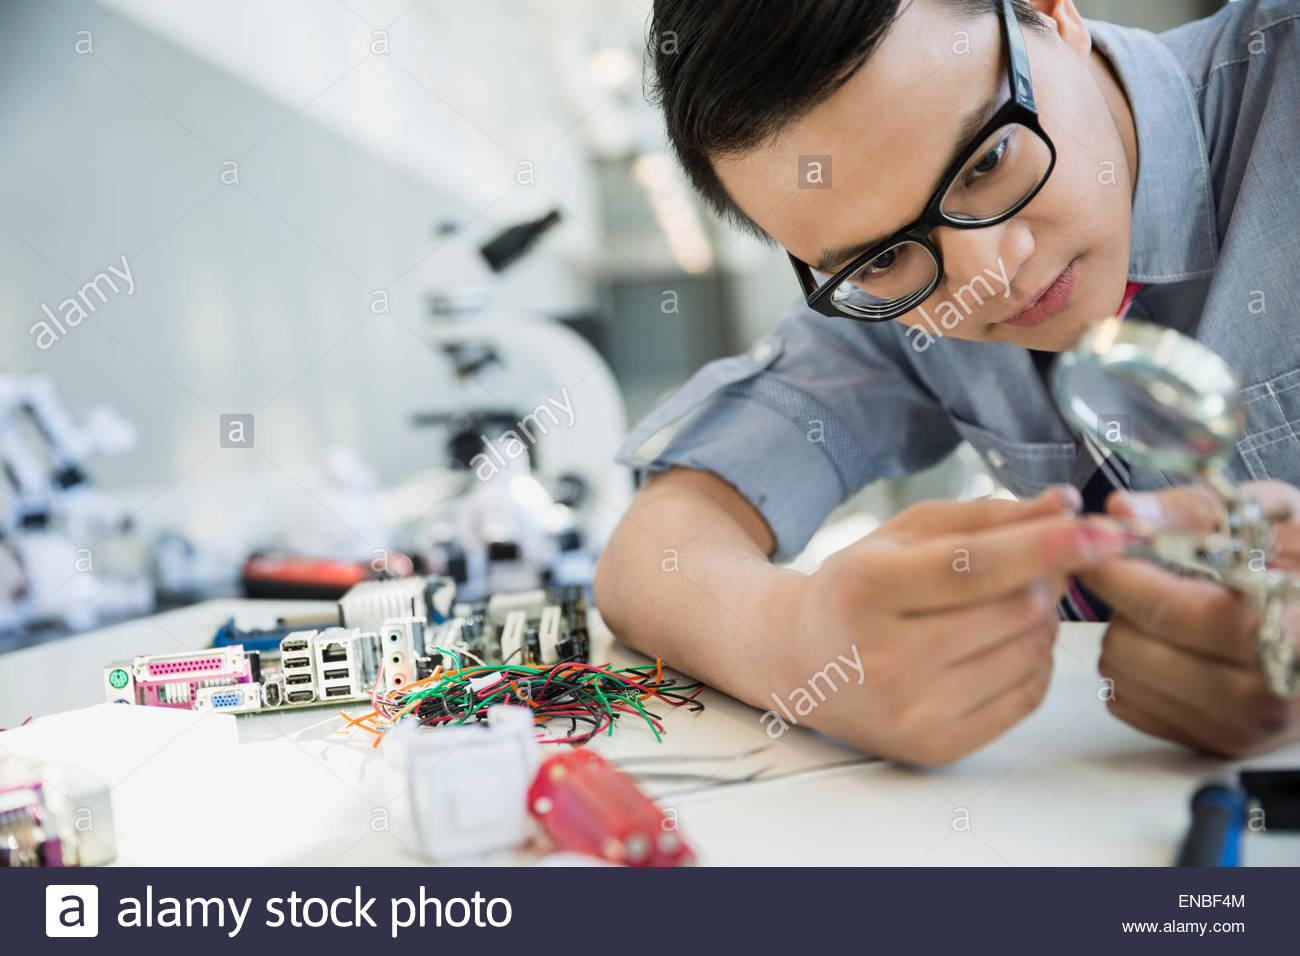 Engineer examining and assembling technology Stock Photo